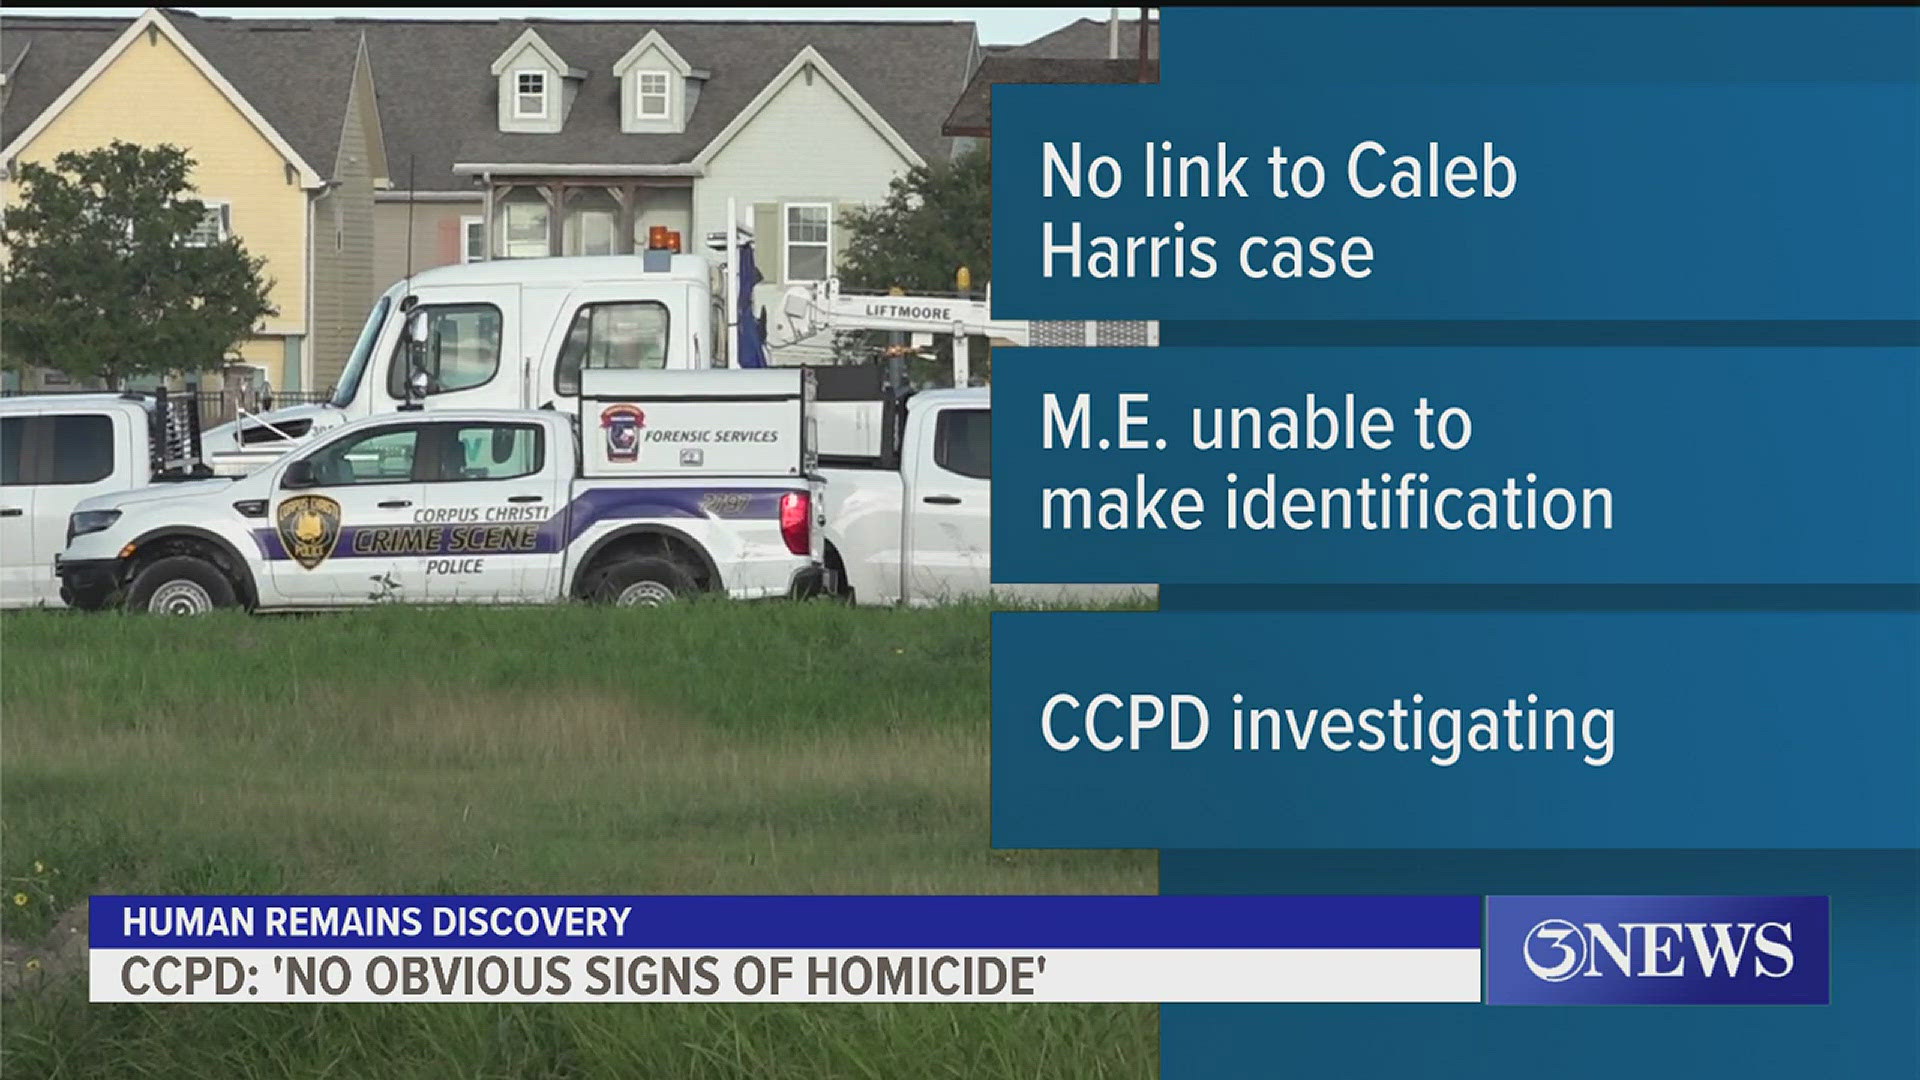 Investigators have not confirmed any link to missing person Caleb Harris who disappeared from a nearby apartment complex March 4.